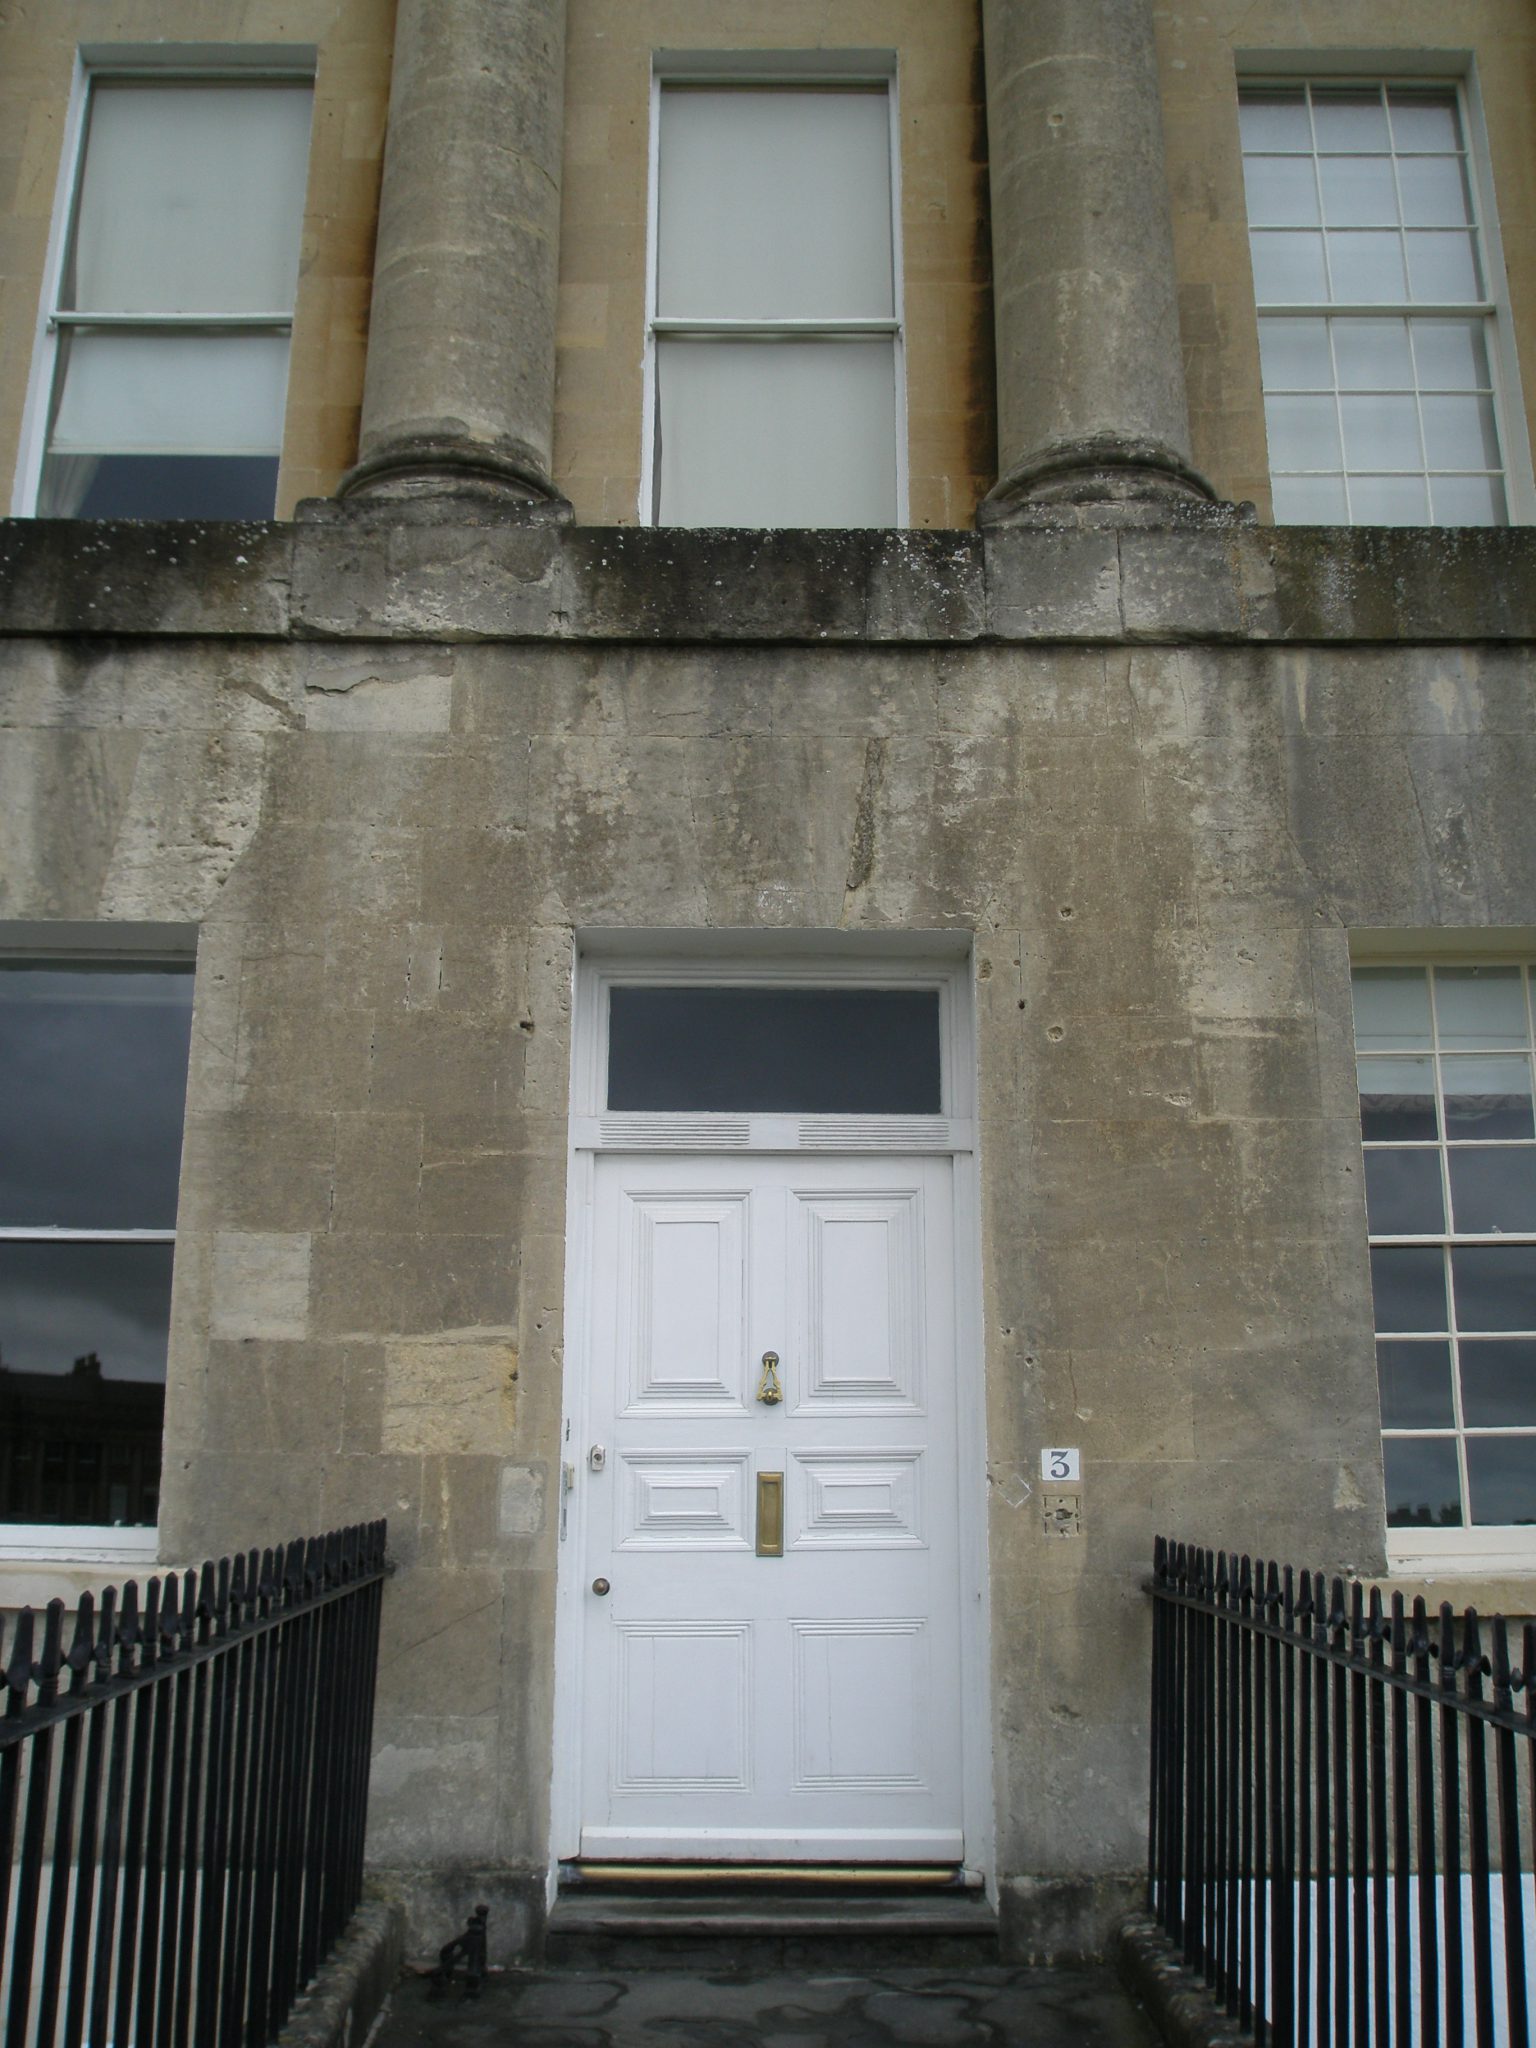 A Woefully Unadorned front door at The Crescent